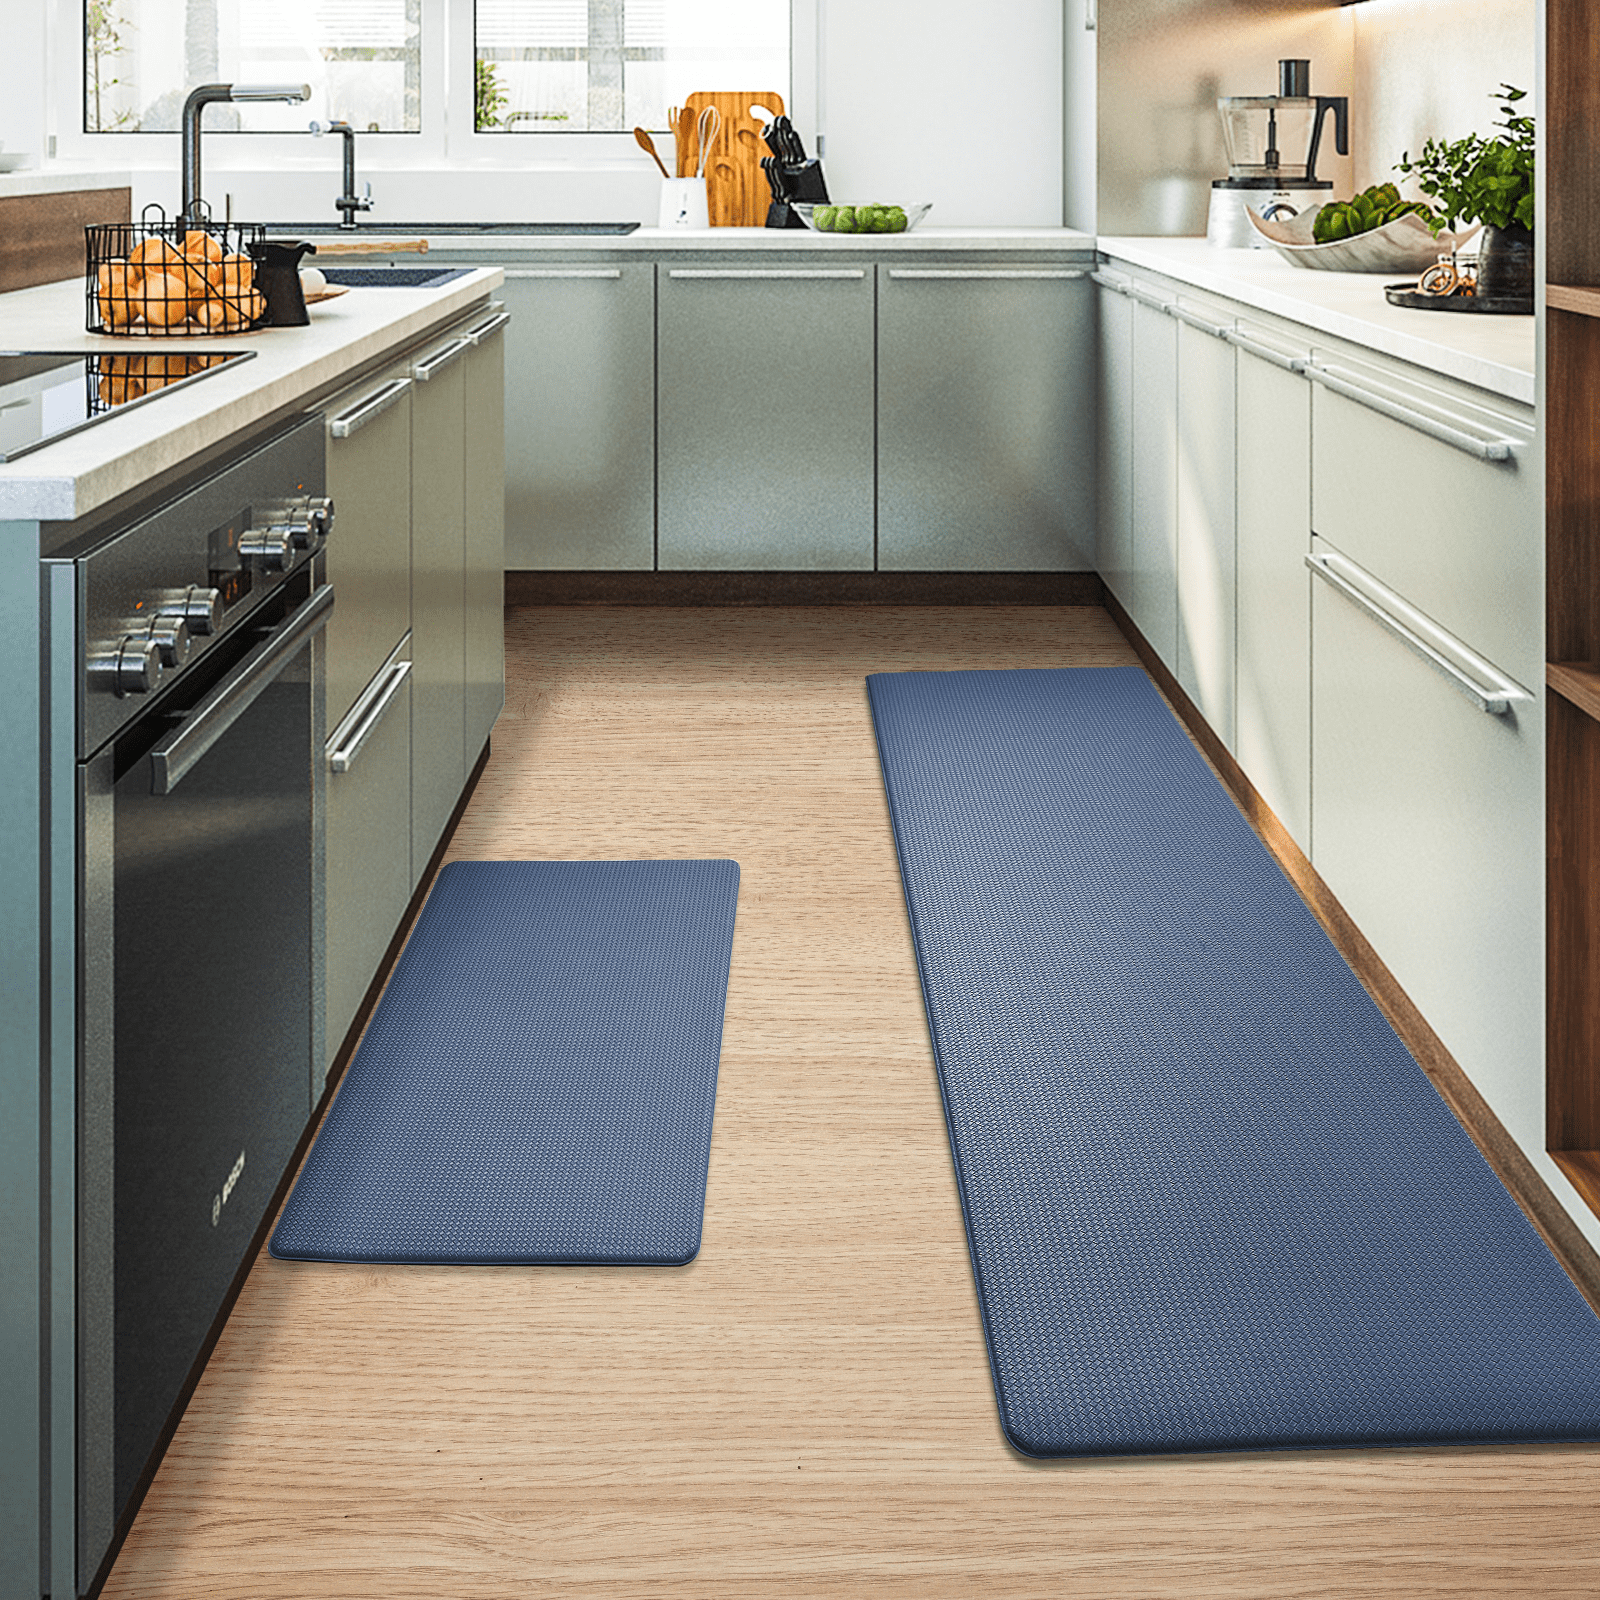 KOKHUB Boho Kitchen Mat, Farmhouse Cushioned Kitchen Rugs, Anti-Fatigue  Non-Slip Kitchen Floor Mats, Stain Resistant Mats for Home, Office, Sink